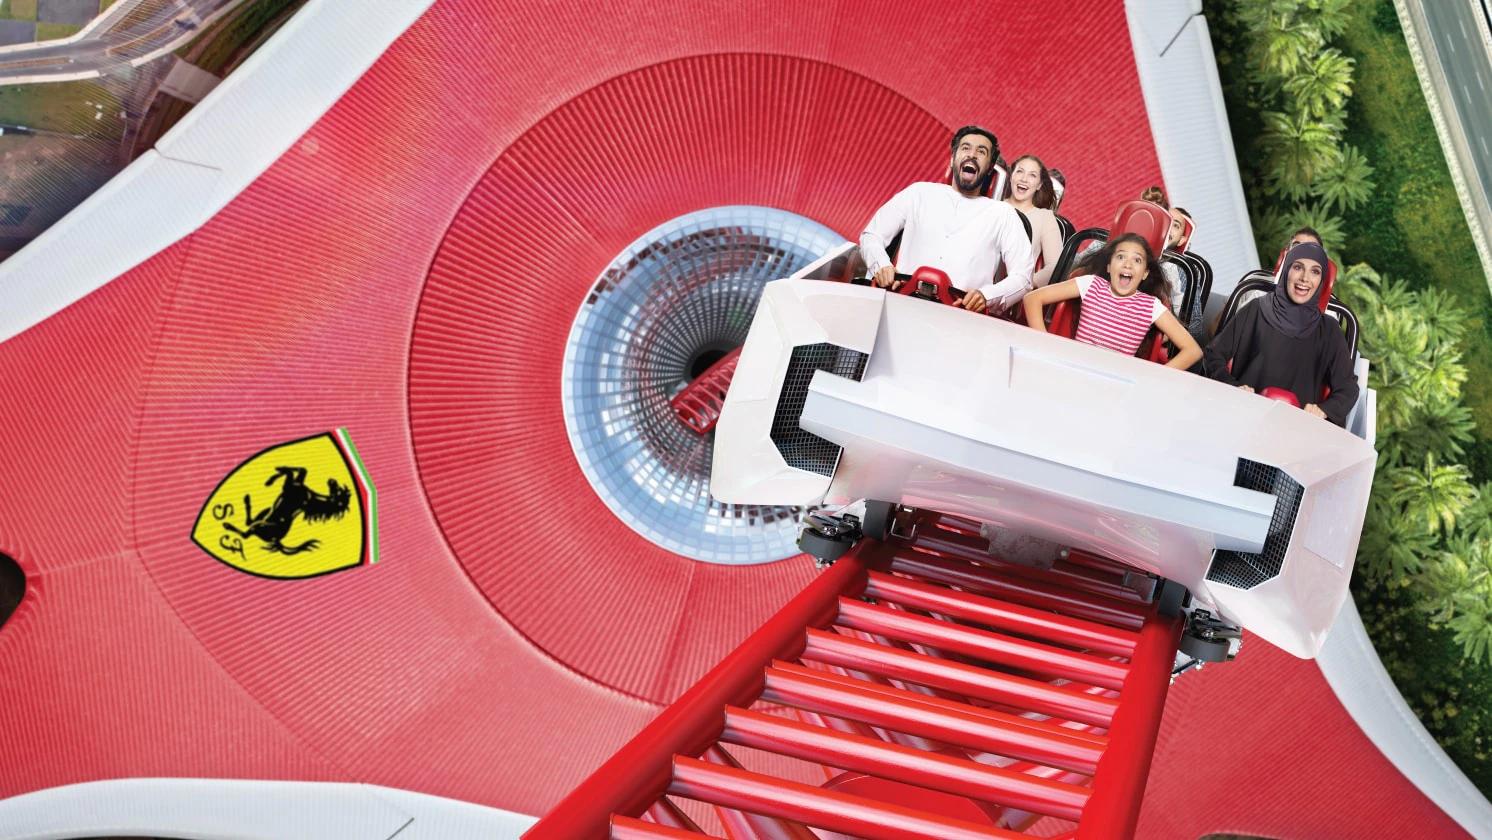 ferrari world abu dhabi g-force - What roller coaster has the most G force